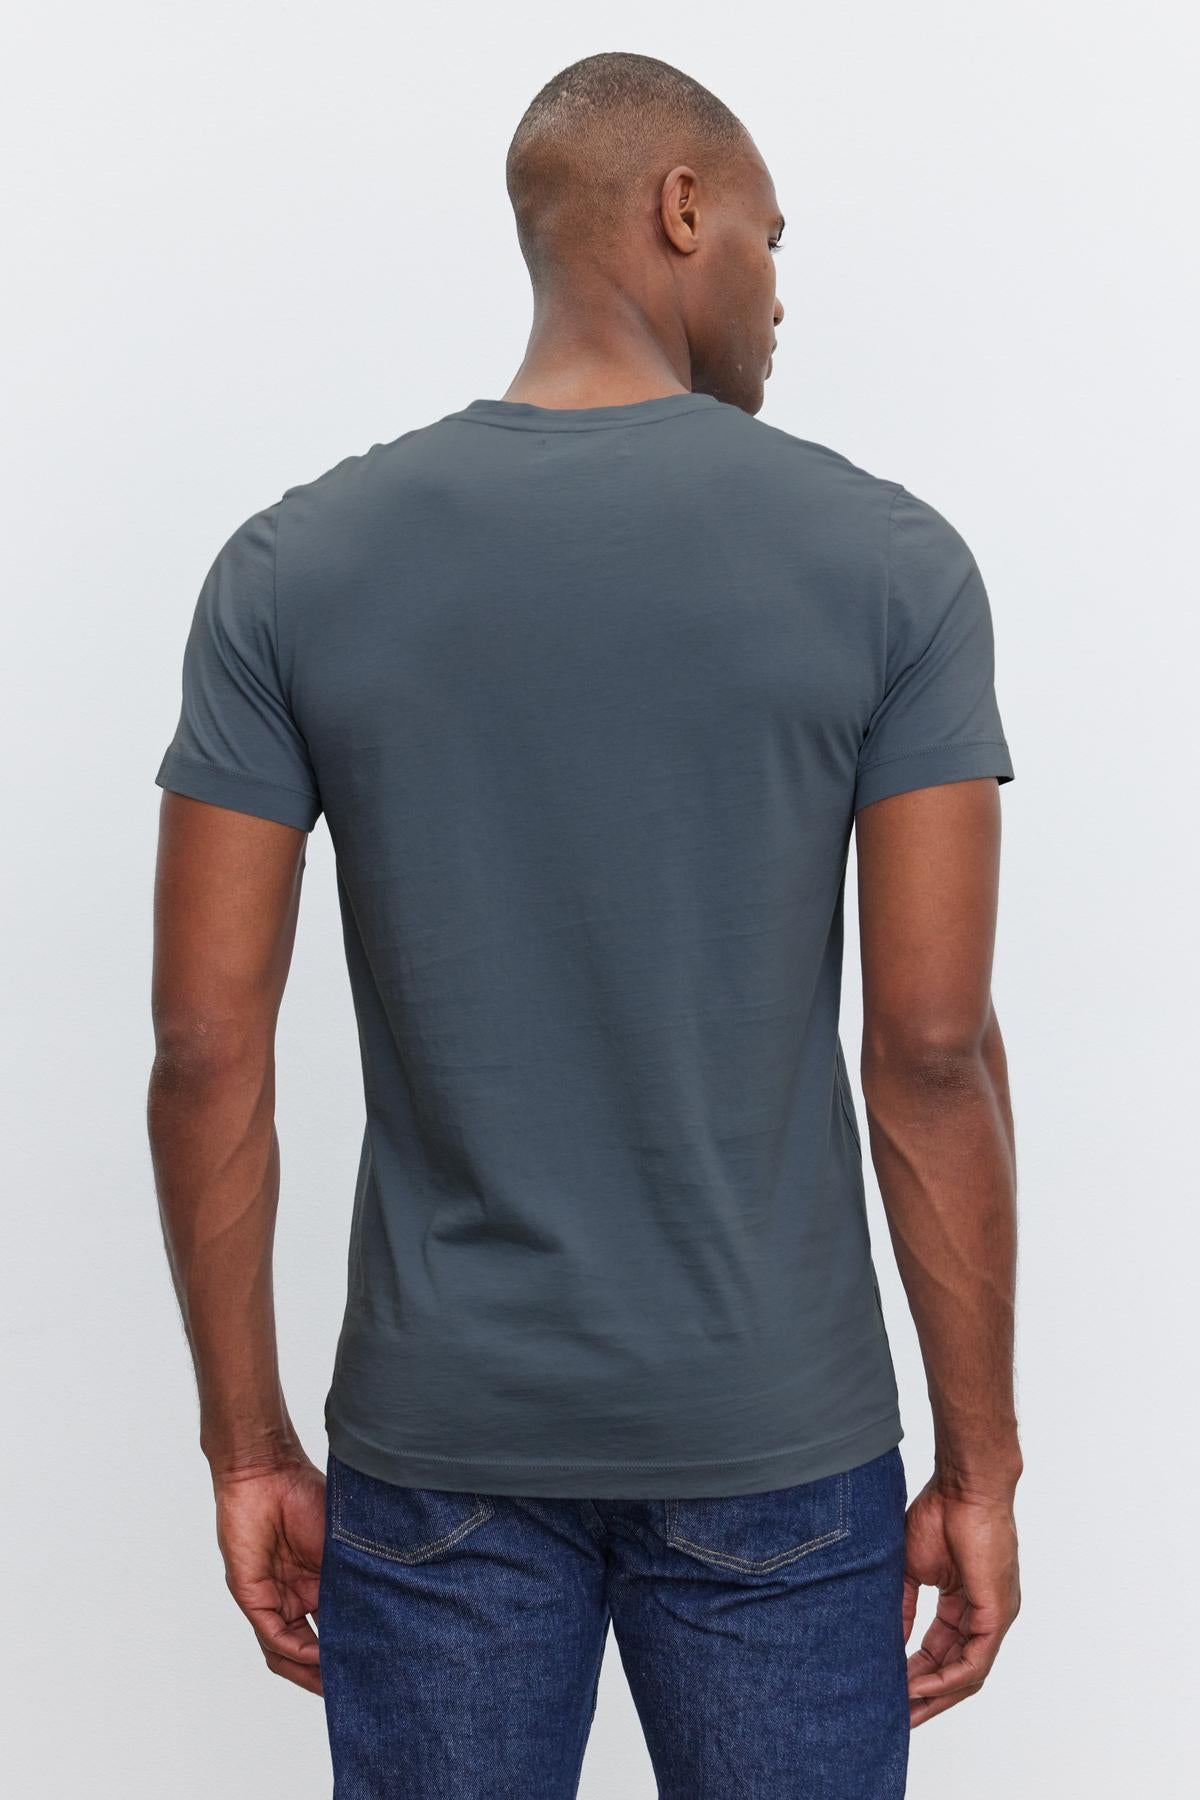   A person wearing a dark gray SAMSEN TEE by Velvet by Graham & Spencer and blue jeans is standing with their back to the camera. 